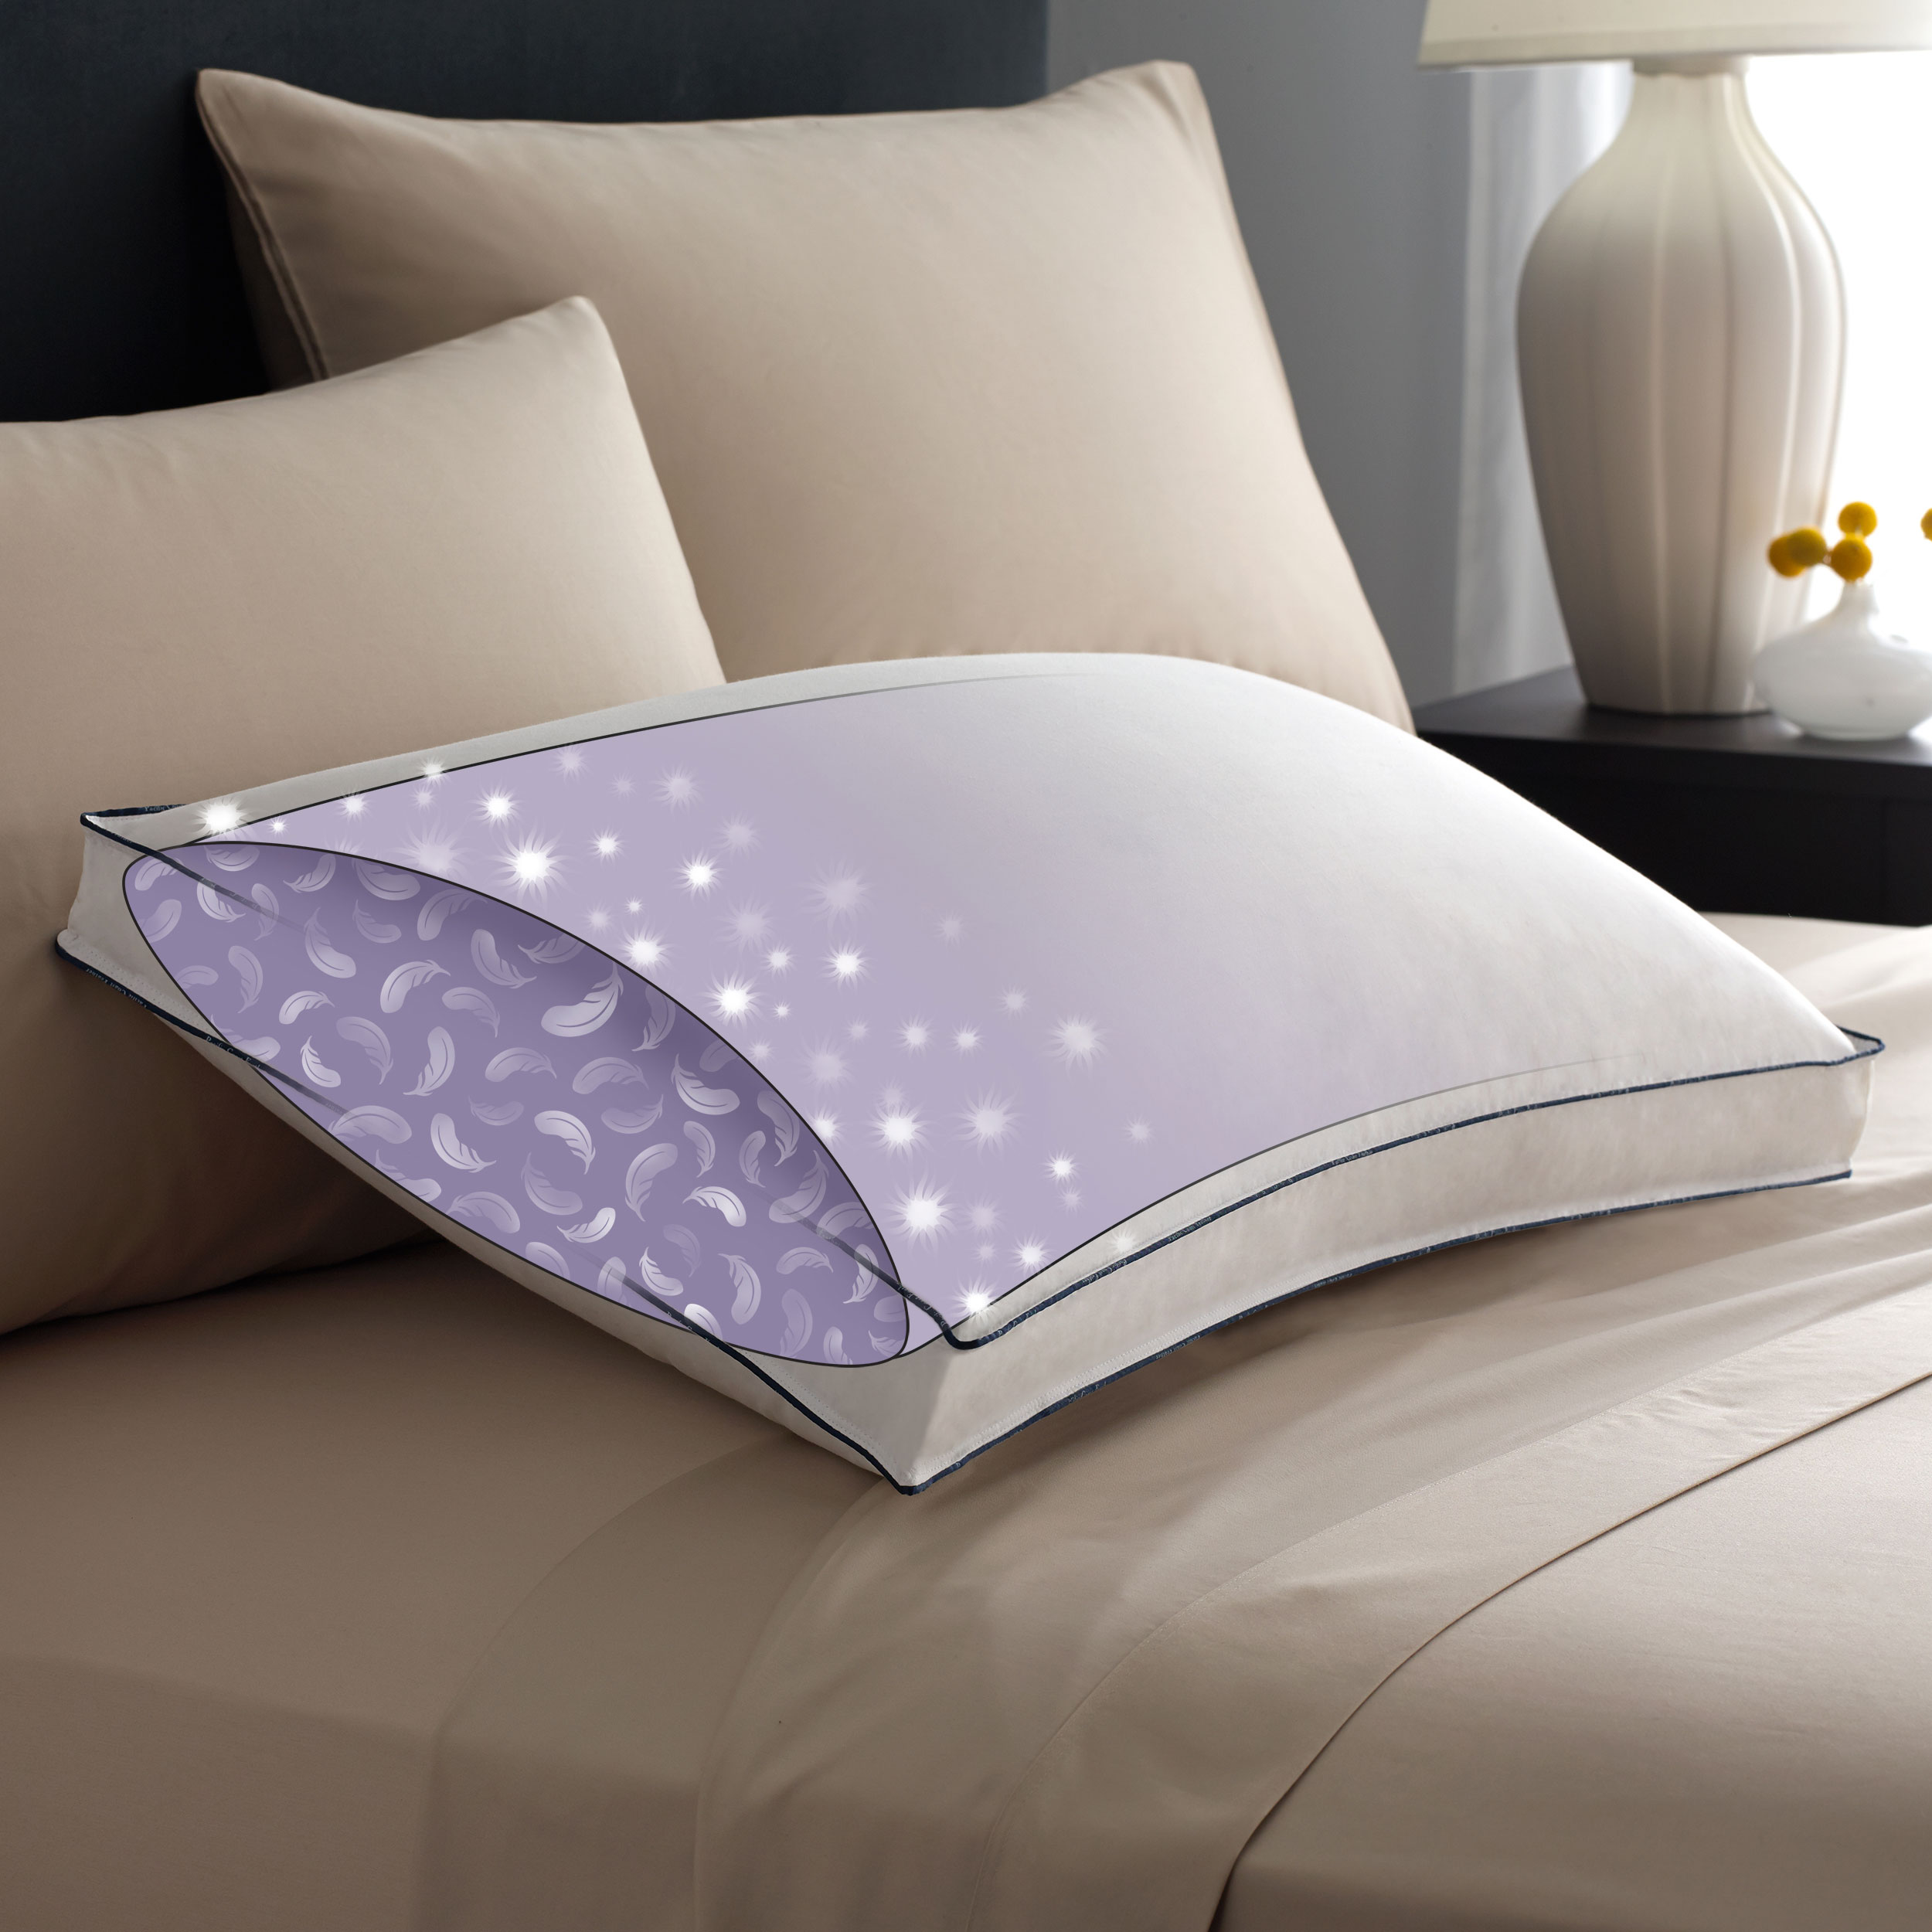 Pacific Coast Double Downaround Firm Pillow 300 Thread Count 550 Fill Power Down & Resilia Feathers - Standard